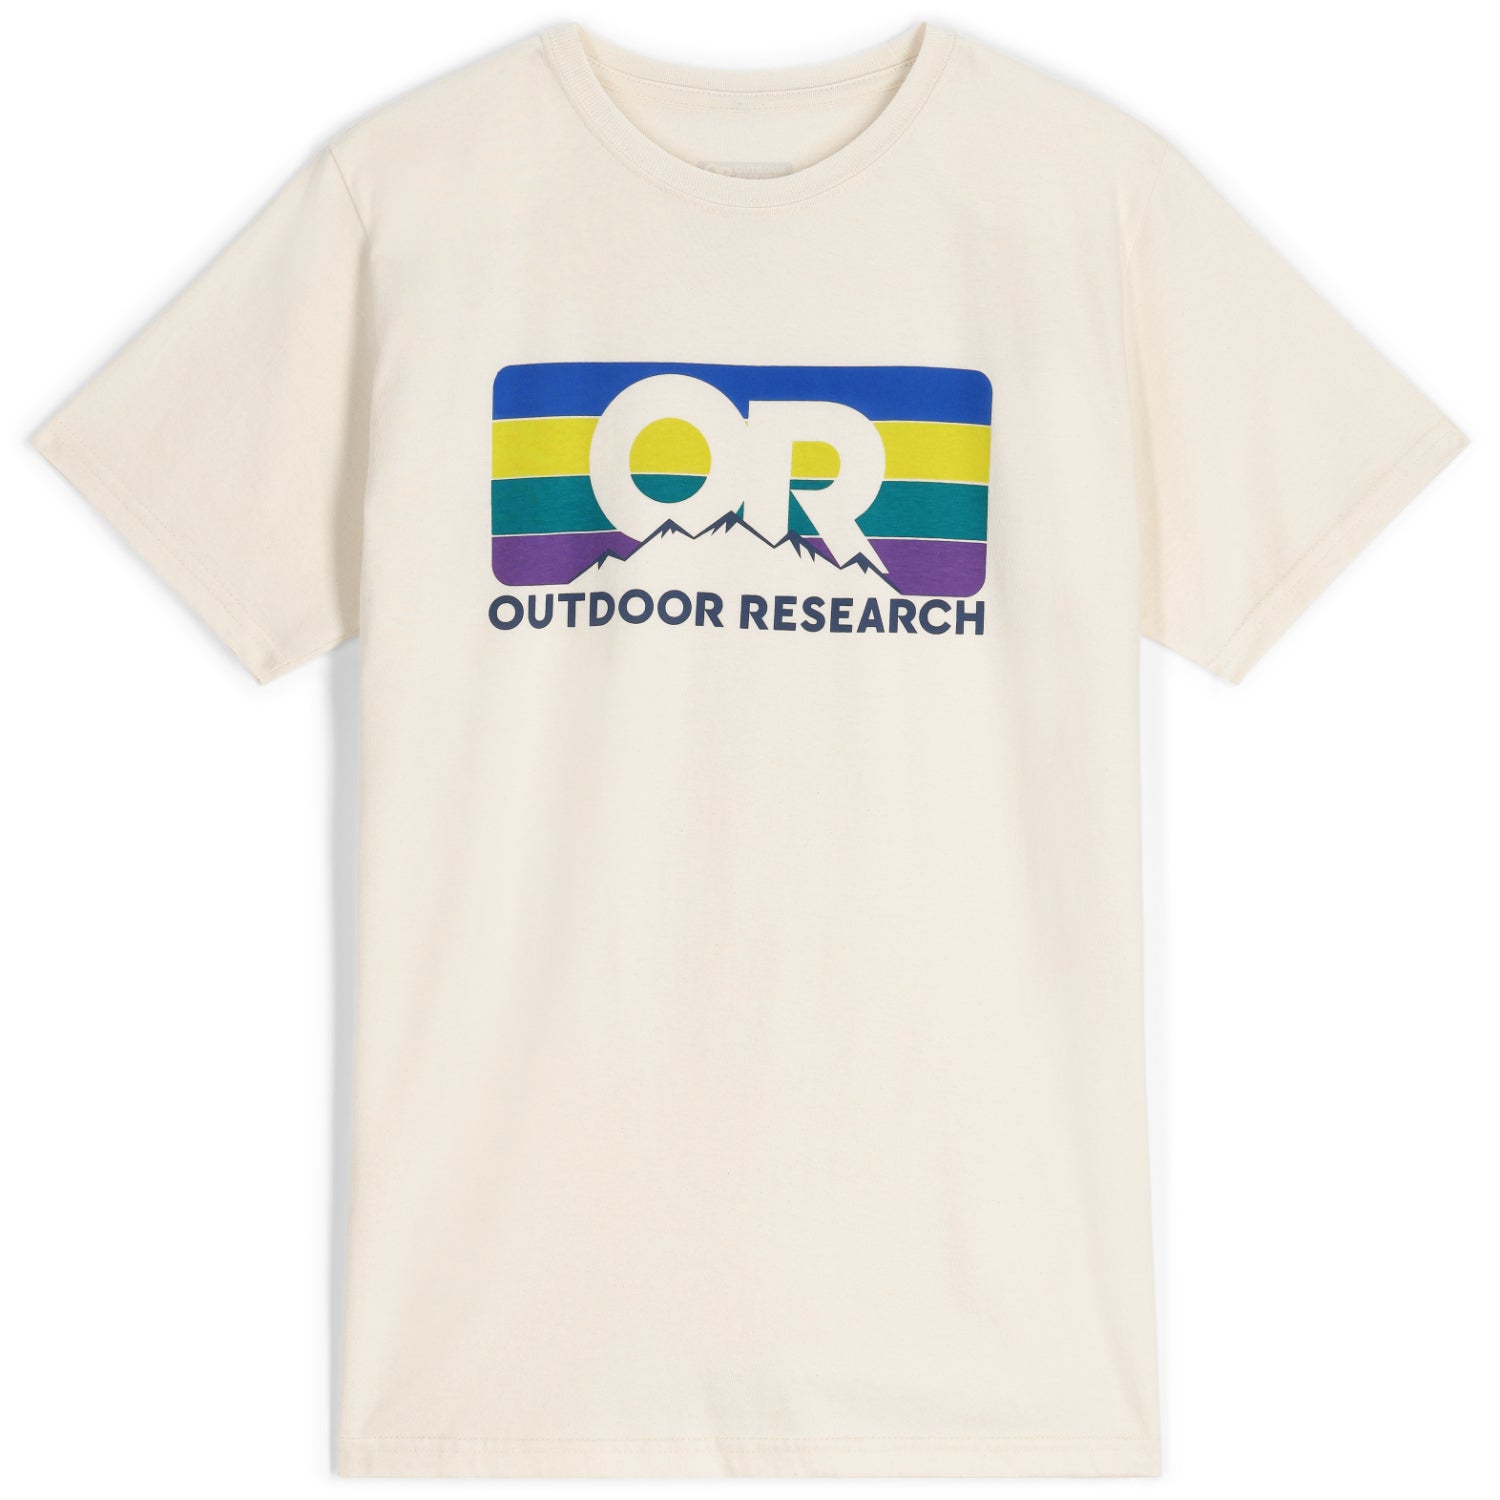 Outdoor Research Advocate Stripe Tee in sand/sulphur colour with a striped colourful logo on the chest